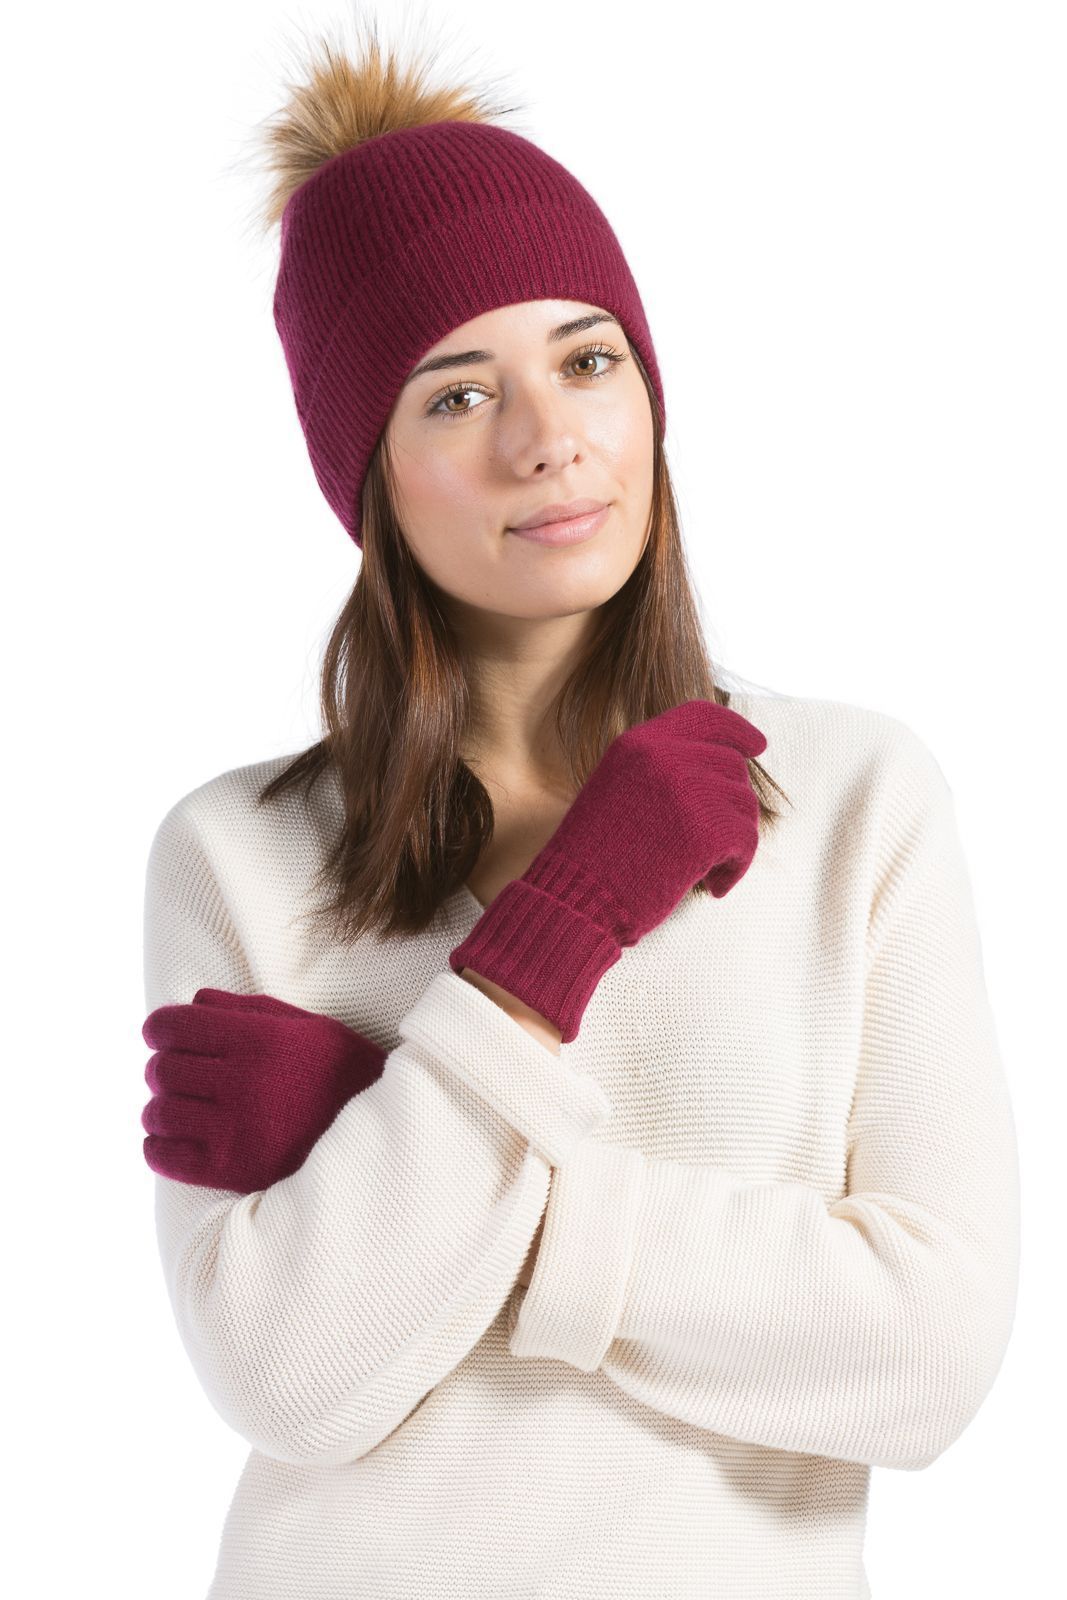 Women's 2pc 100% Cashmere Pom Beanie Hat & Glove Set with Gift Box Womens>Accessories>Hat Fishers Finery Cabernet One Size 